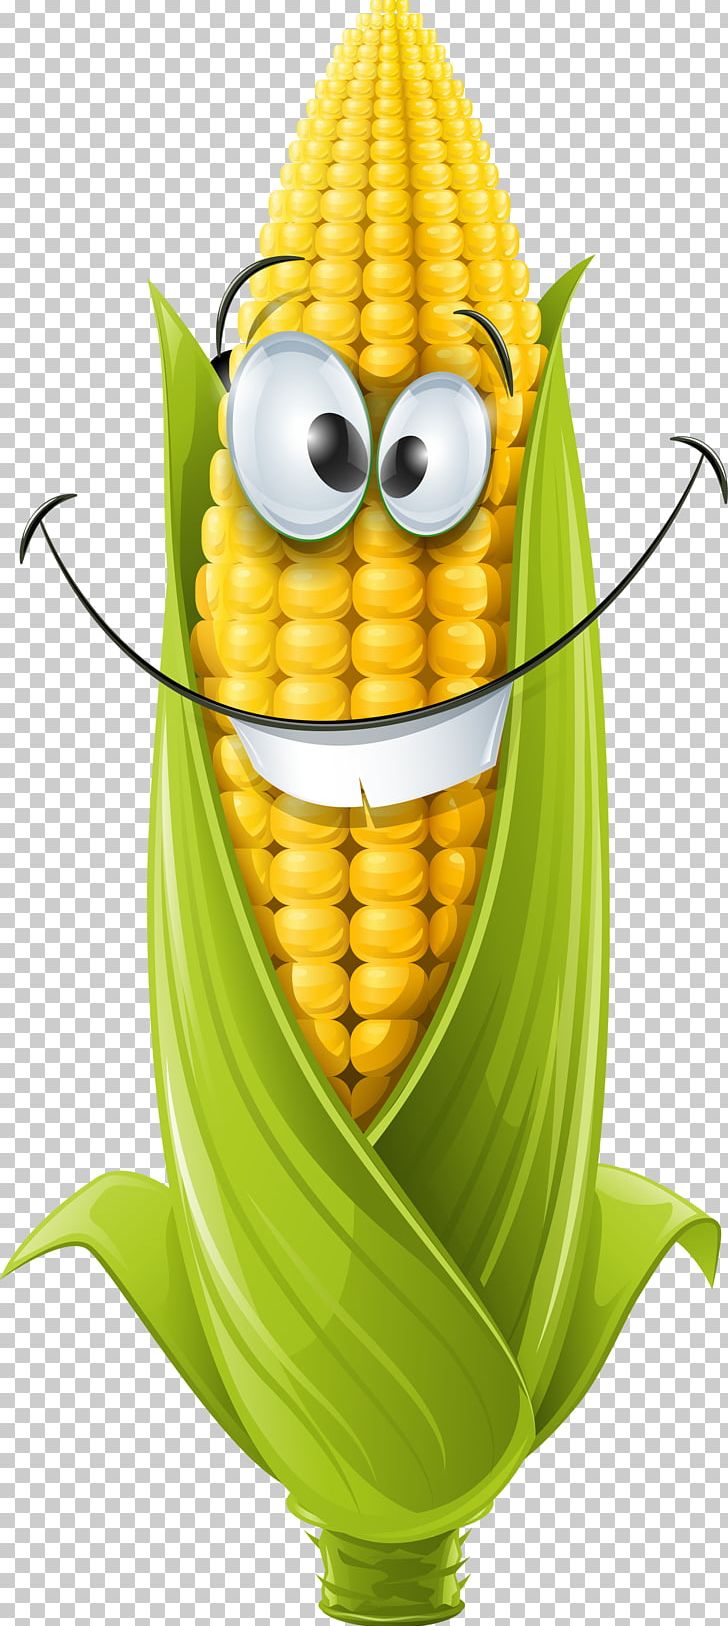 Corn On The Cob Maize PNG, Clipart, Art, Banana, Cartoon, Commodity, Corn Free PNG Download